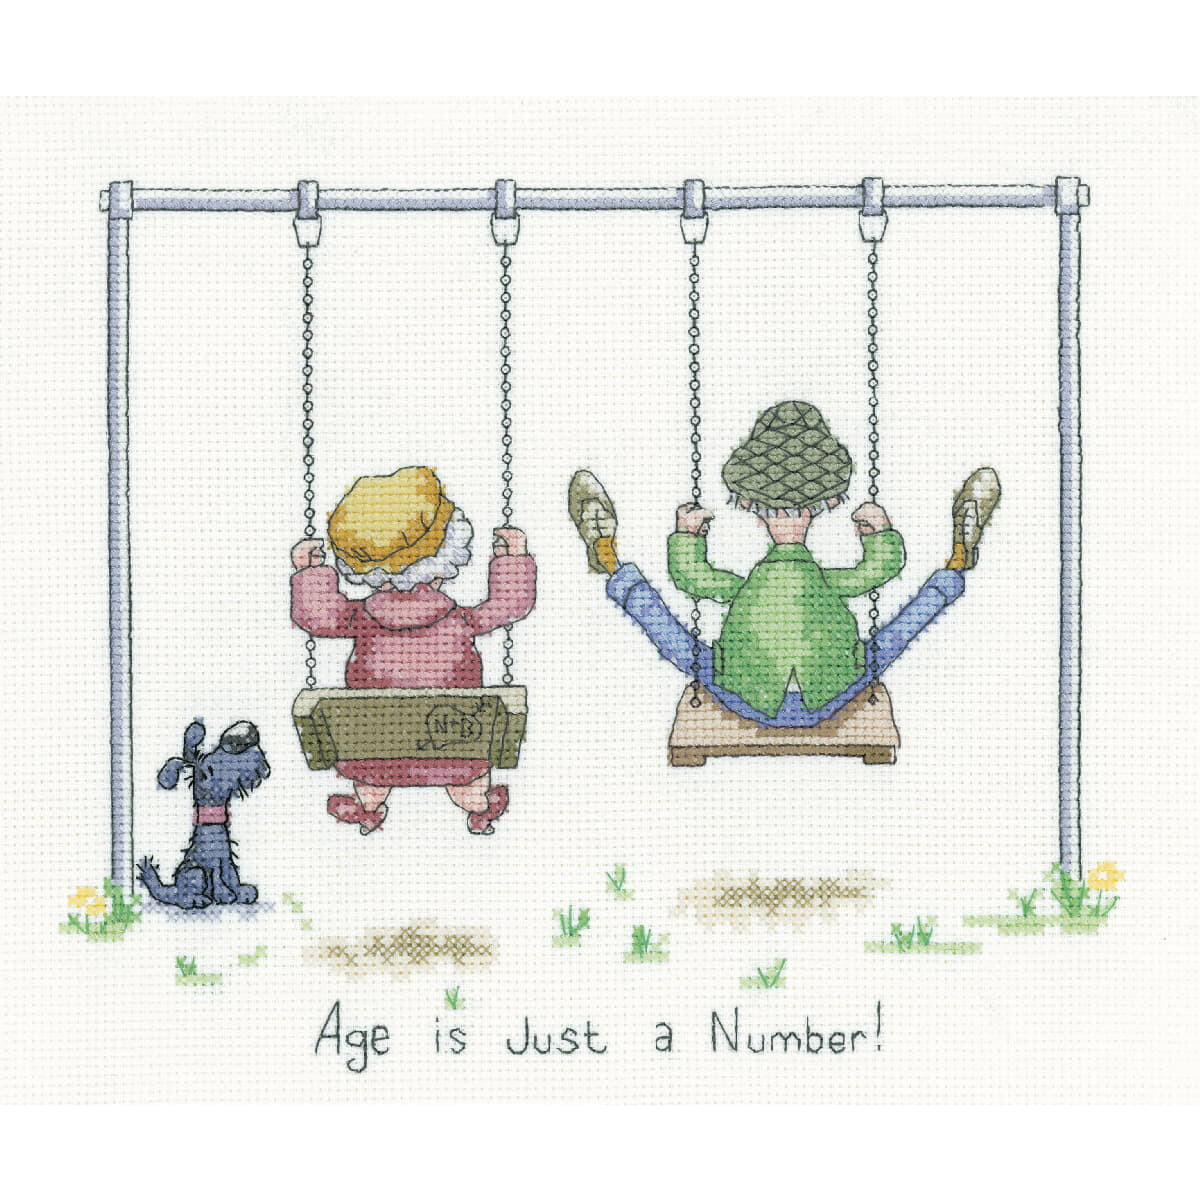 Heritage counted cross stitch kit Aida "Just a...